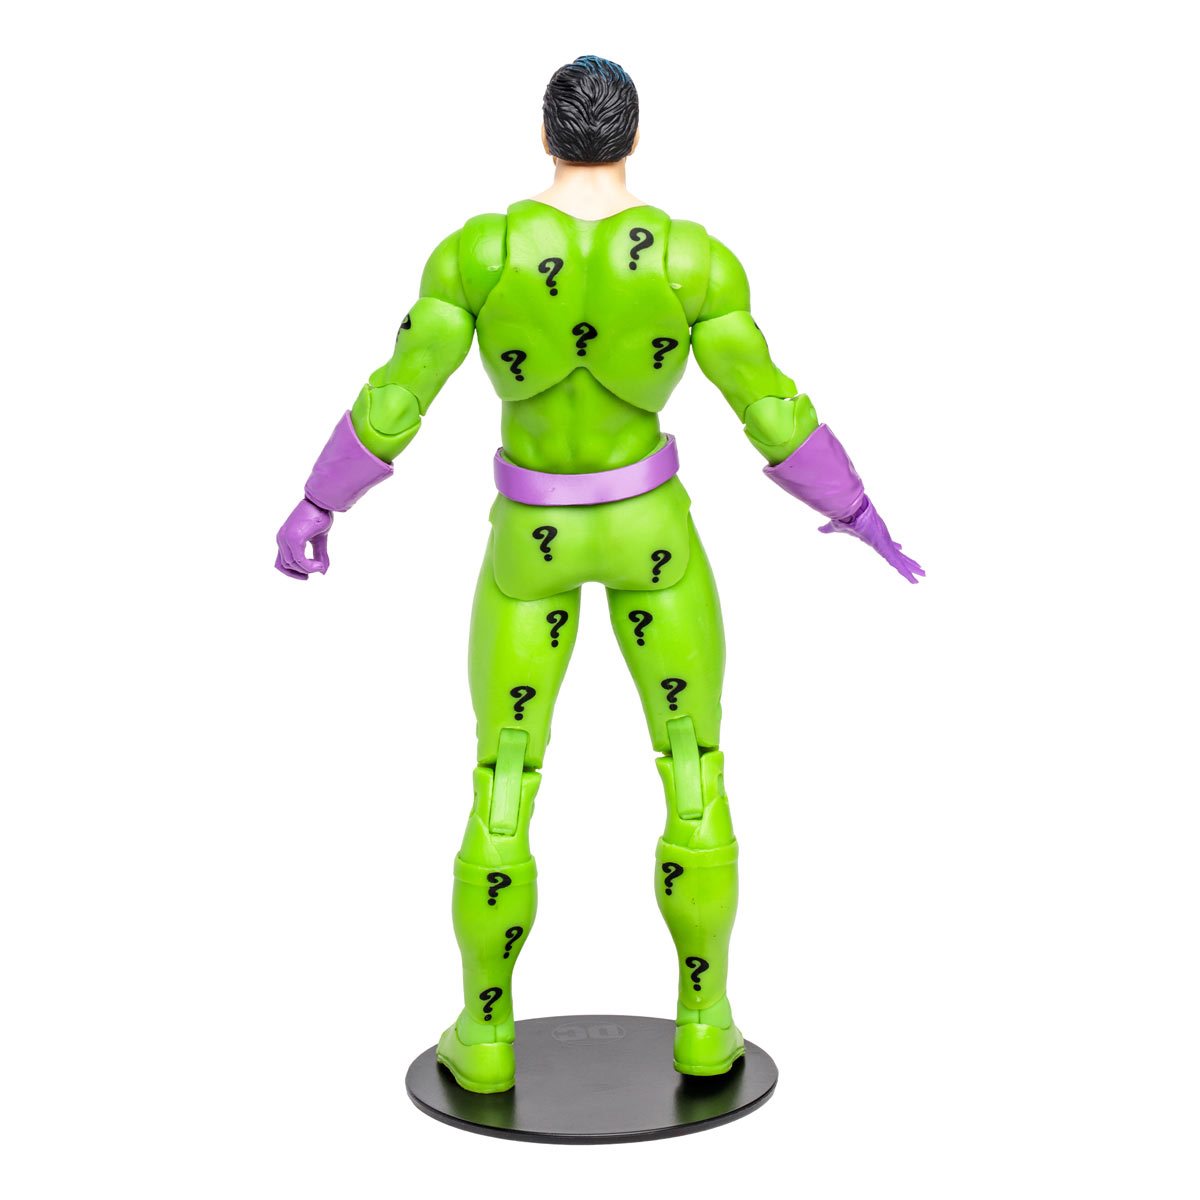 McFarlane DC Multiverse Riddler(DC Classic) 7-Inch Action Figure画像